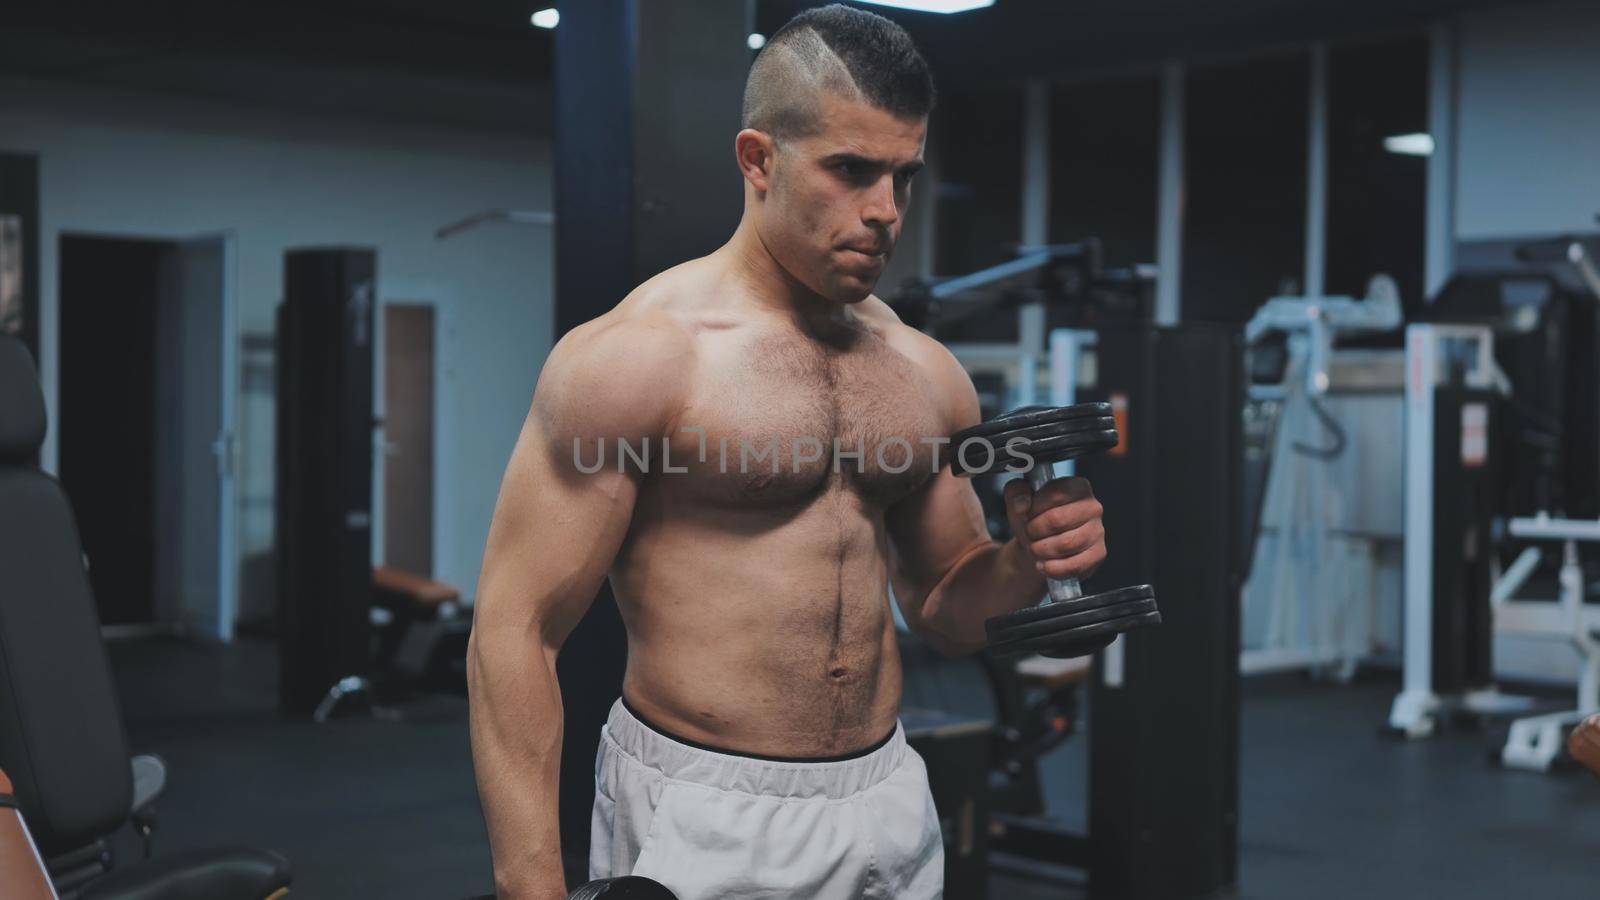 Muscular arab man training with dumbbells in the gym